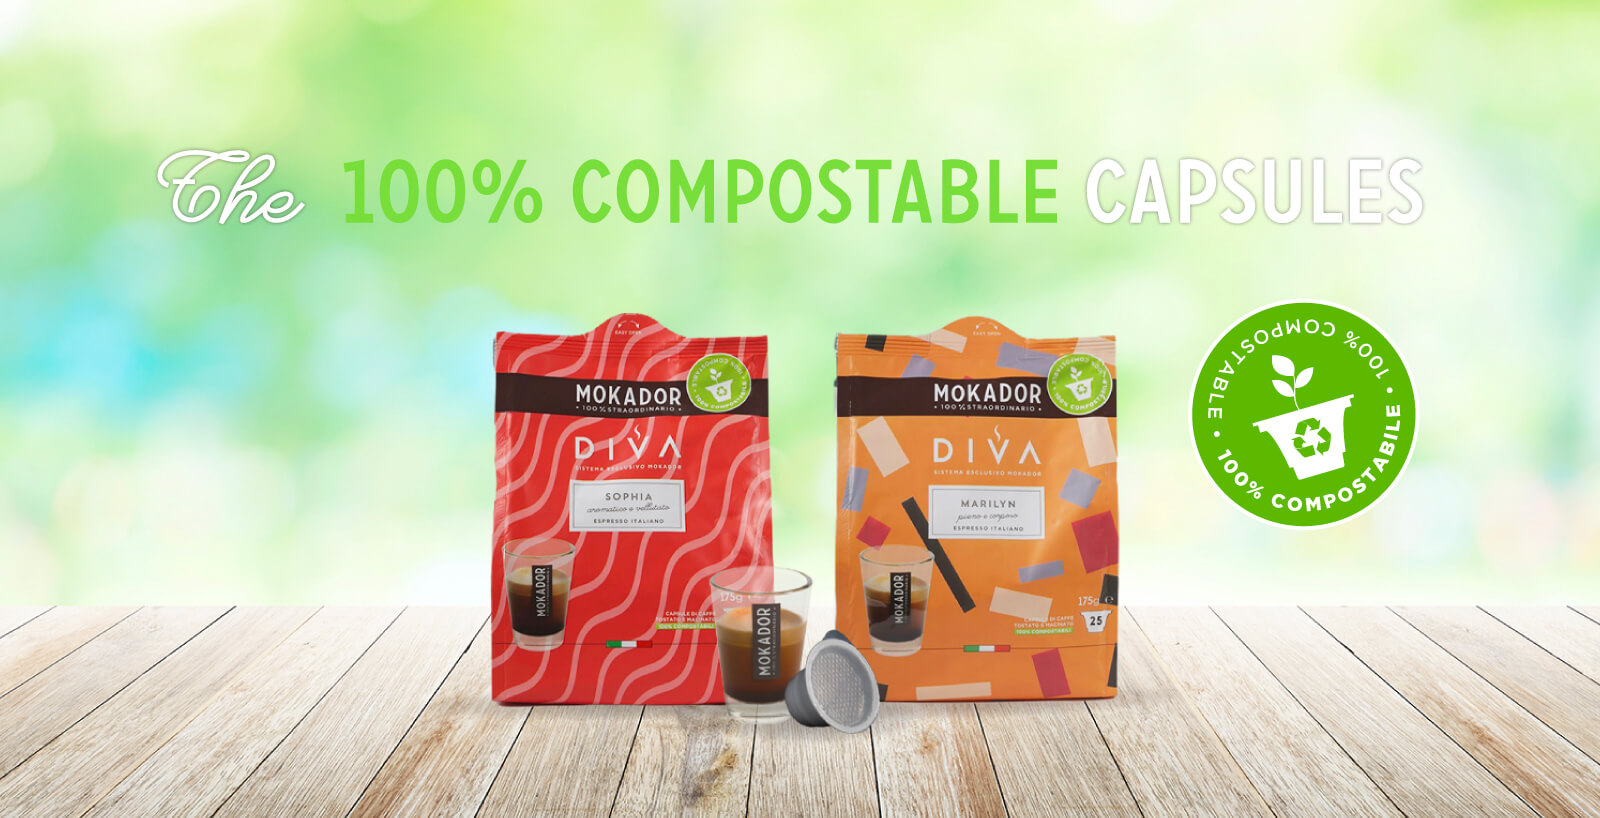 The 100% compostable capsules